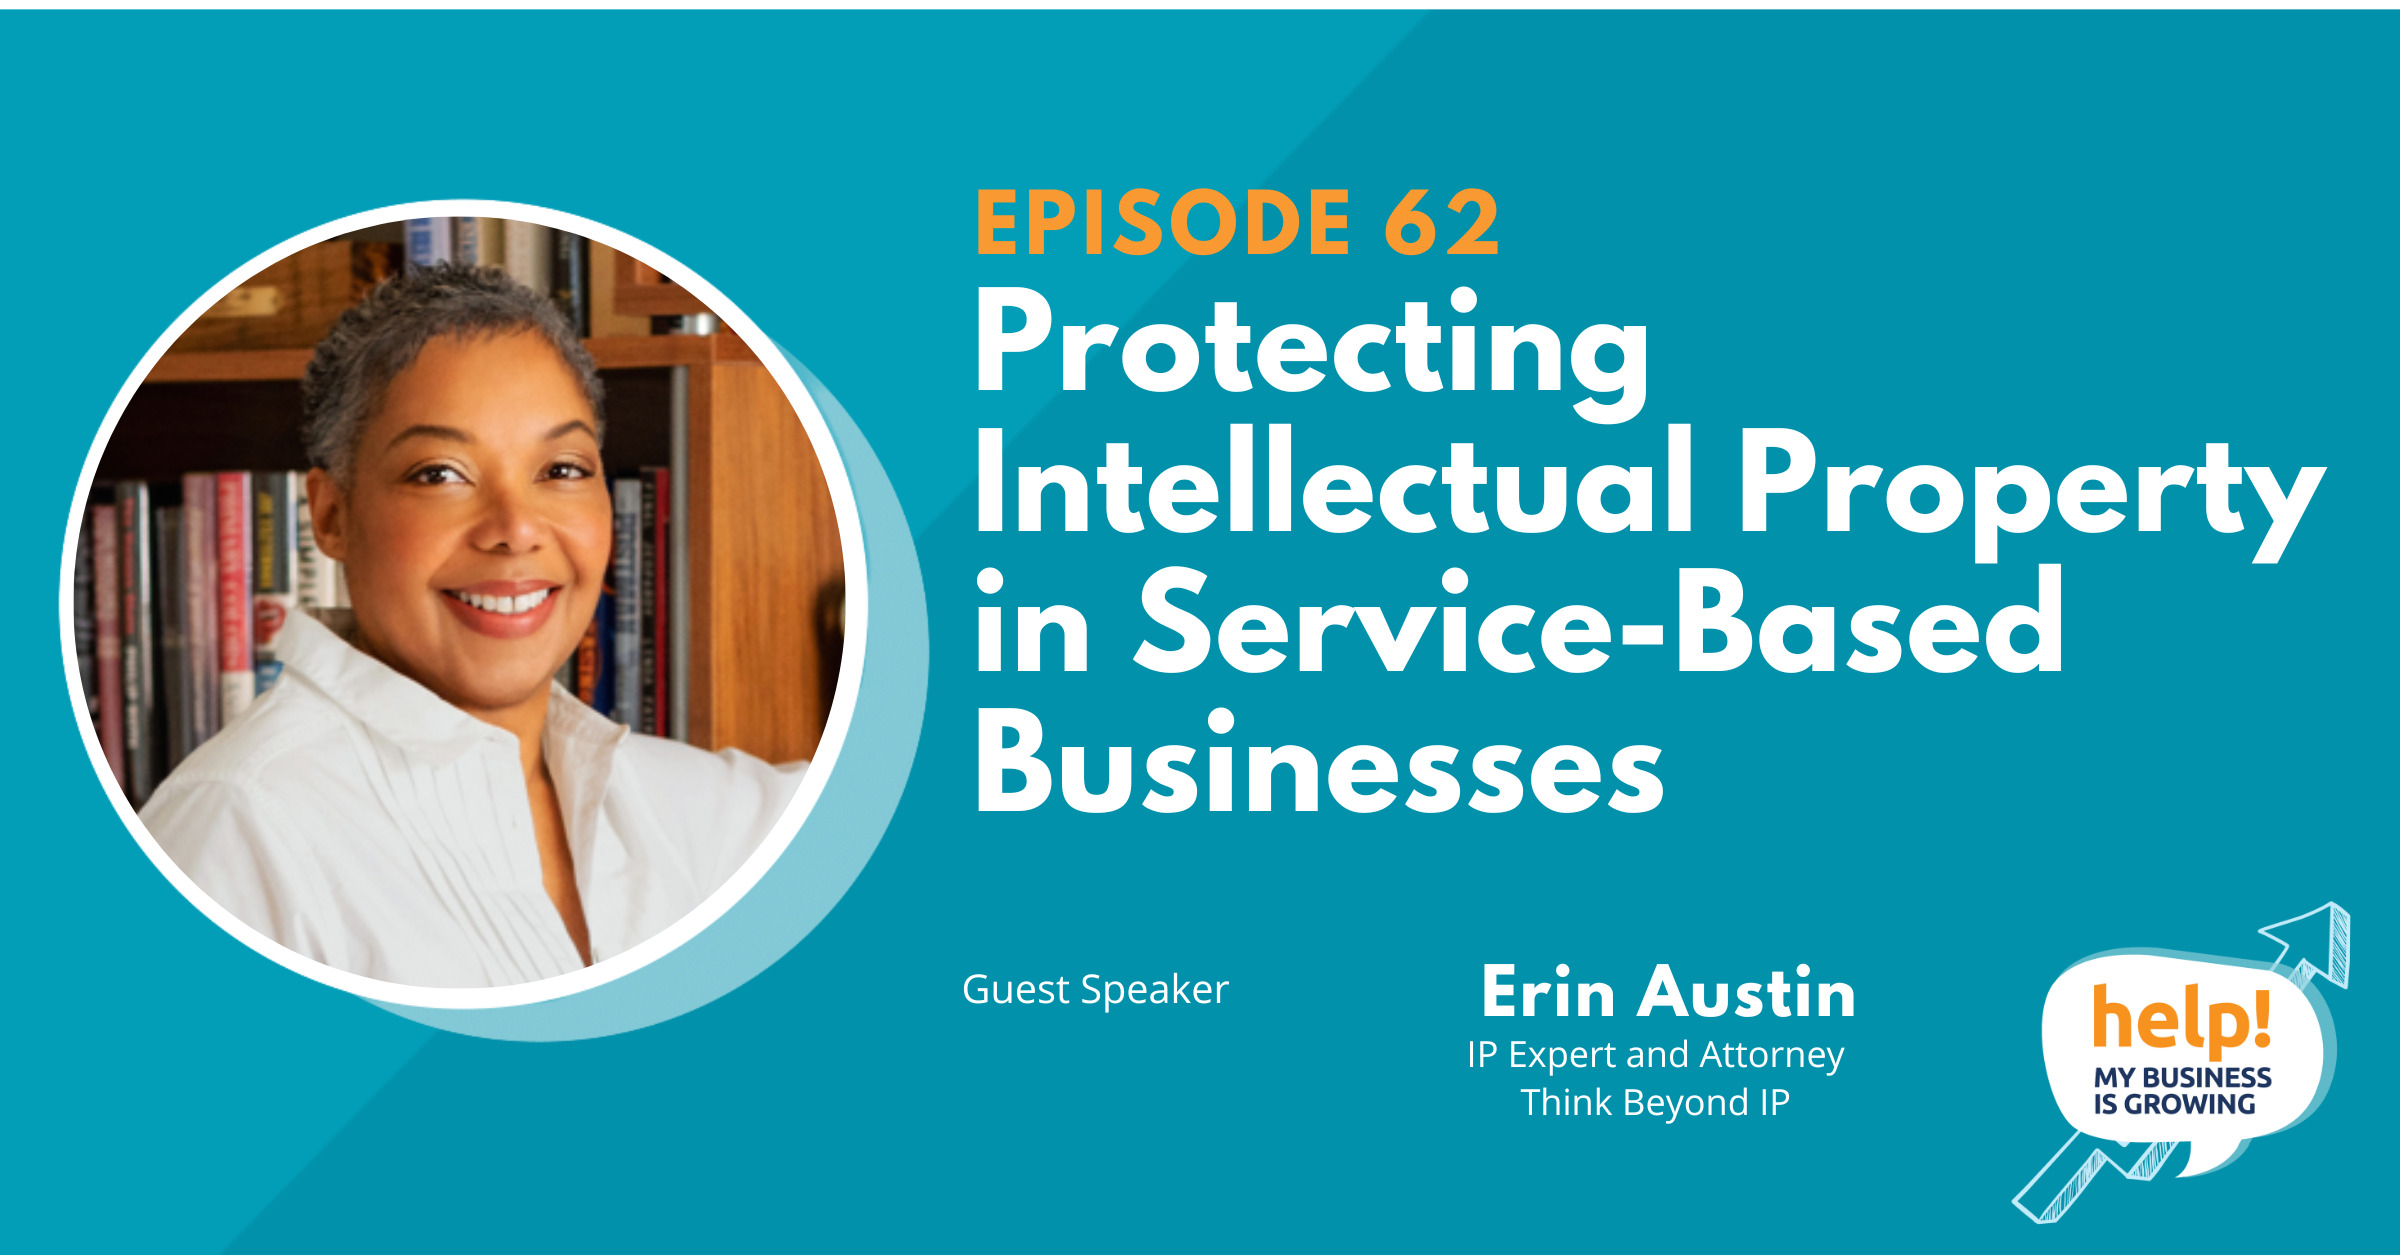 Protecting Intellectual Property in Service-Based Businesses